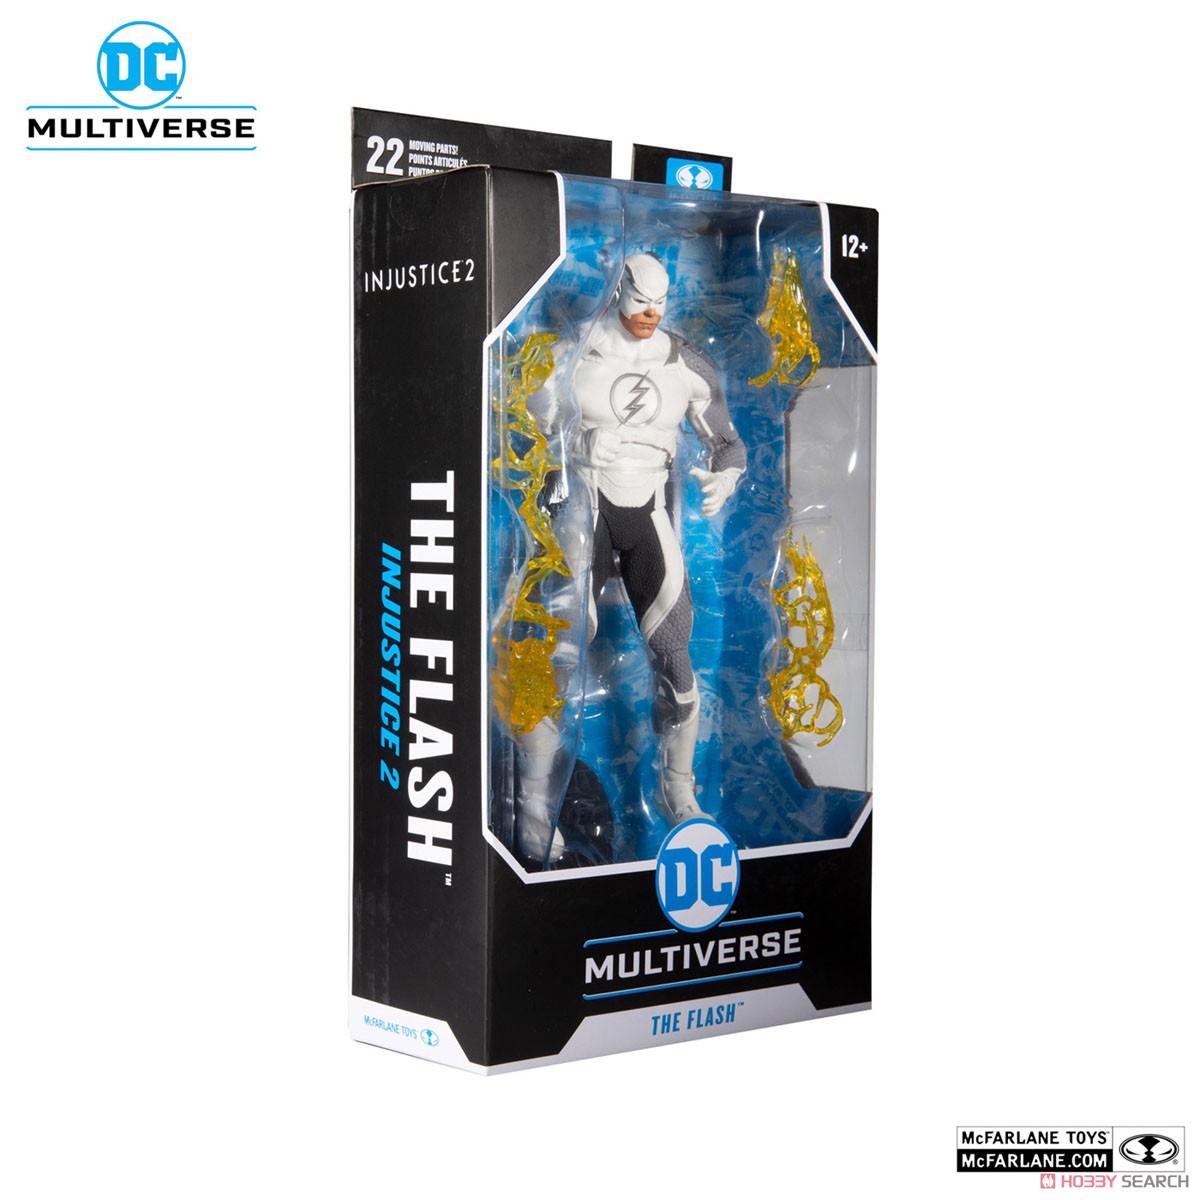 DC Comics - DC Multiverse: 7 Inch Action Figure - #066 The Flash (Hot Pursuit) [Game / Injustice 2] (Completed) Package2